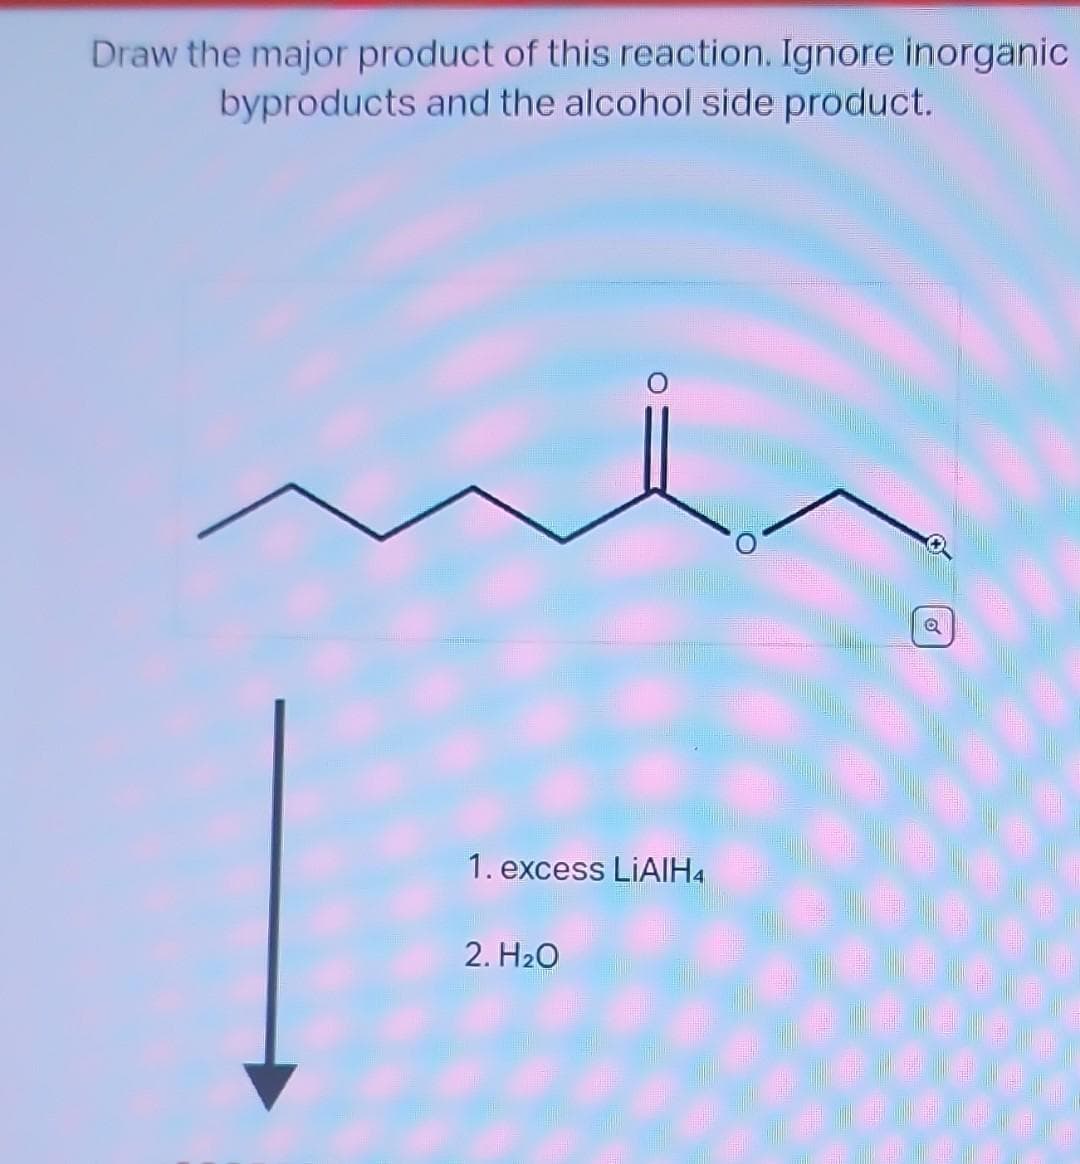 Draw the major product of this reaction. Ignore inorganic
byproducts and the alcohol side product.
1. excess LiAlH4
2. H₂O
O
Q